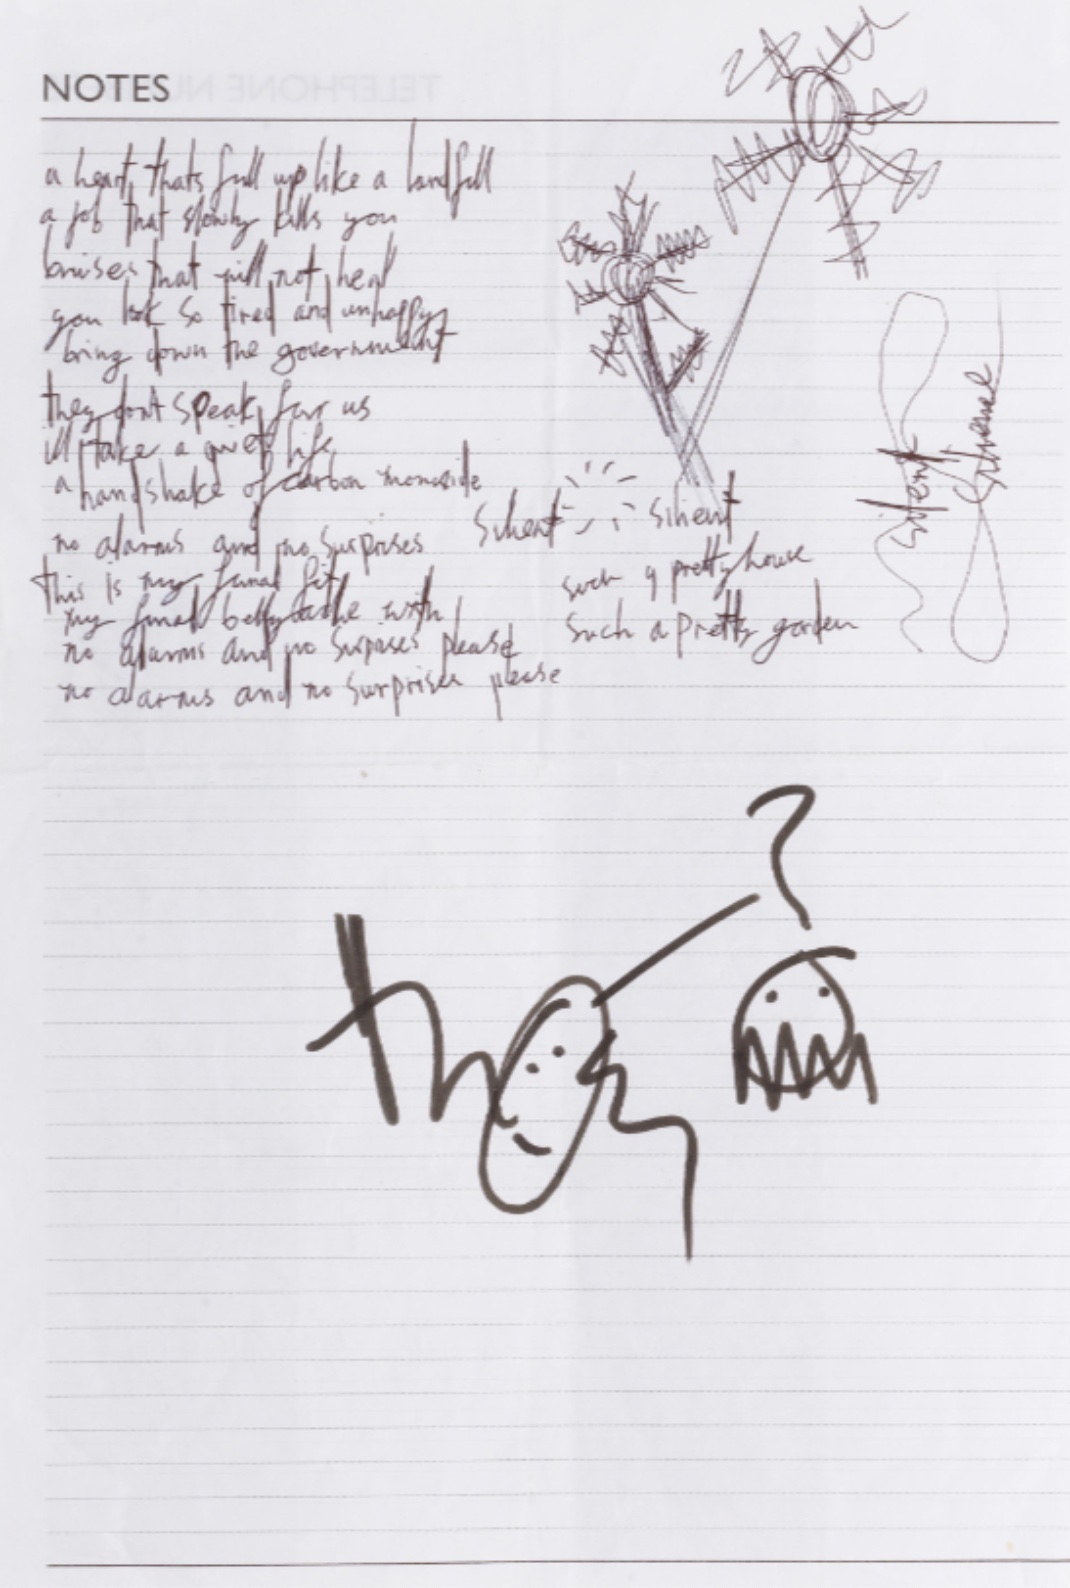 Thom Yorke handwritten lyrics to the song 'No Surprises' from the album 'OK Computer'